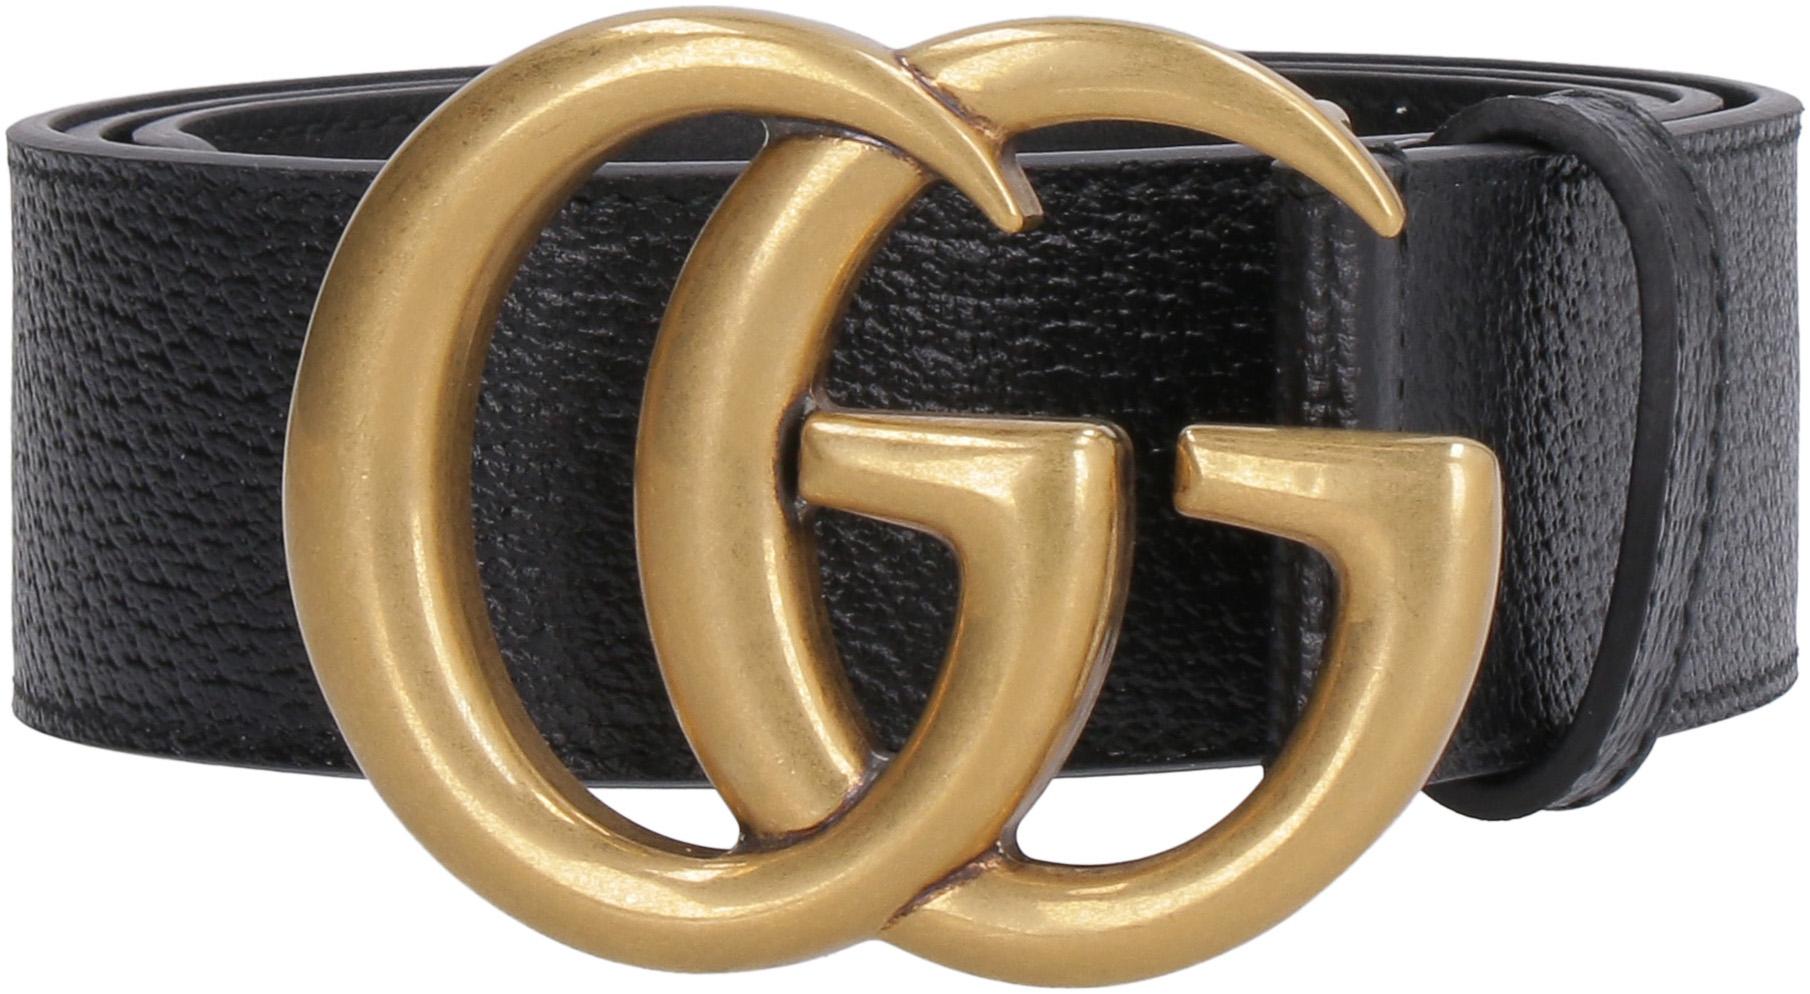 Gucci Leather GG Marmont Reversible Belt in Black/Gold (Black) - Save ...